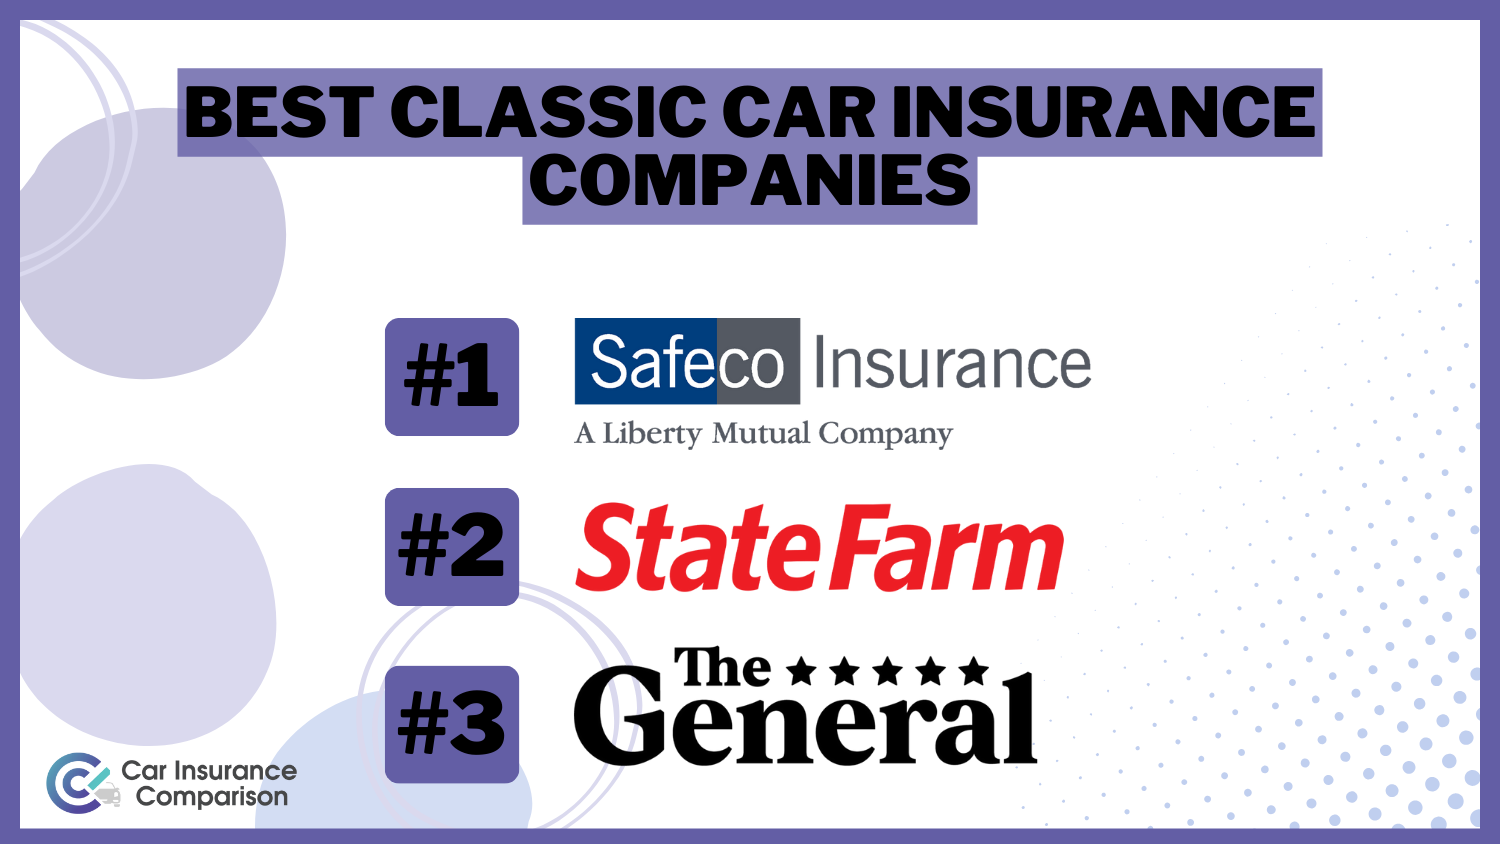 Safeco, State Farm, and The General: Best Classic Car Insurance Companies